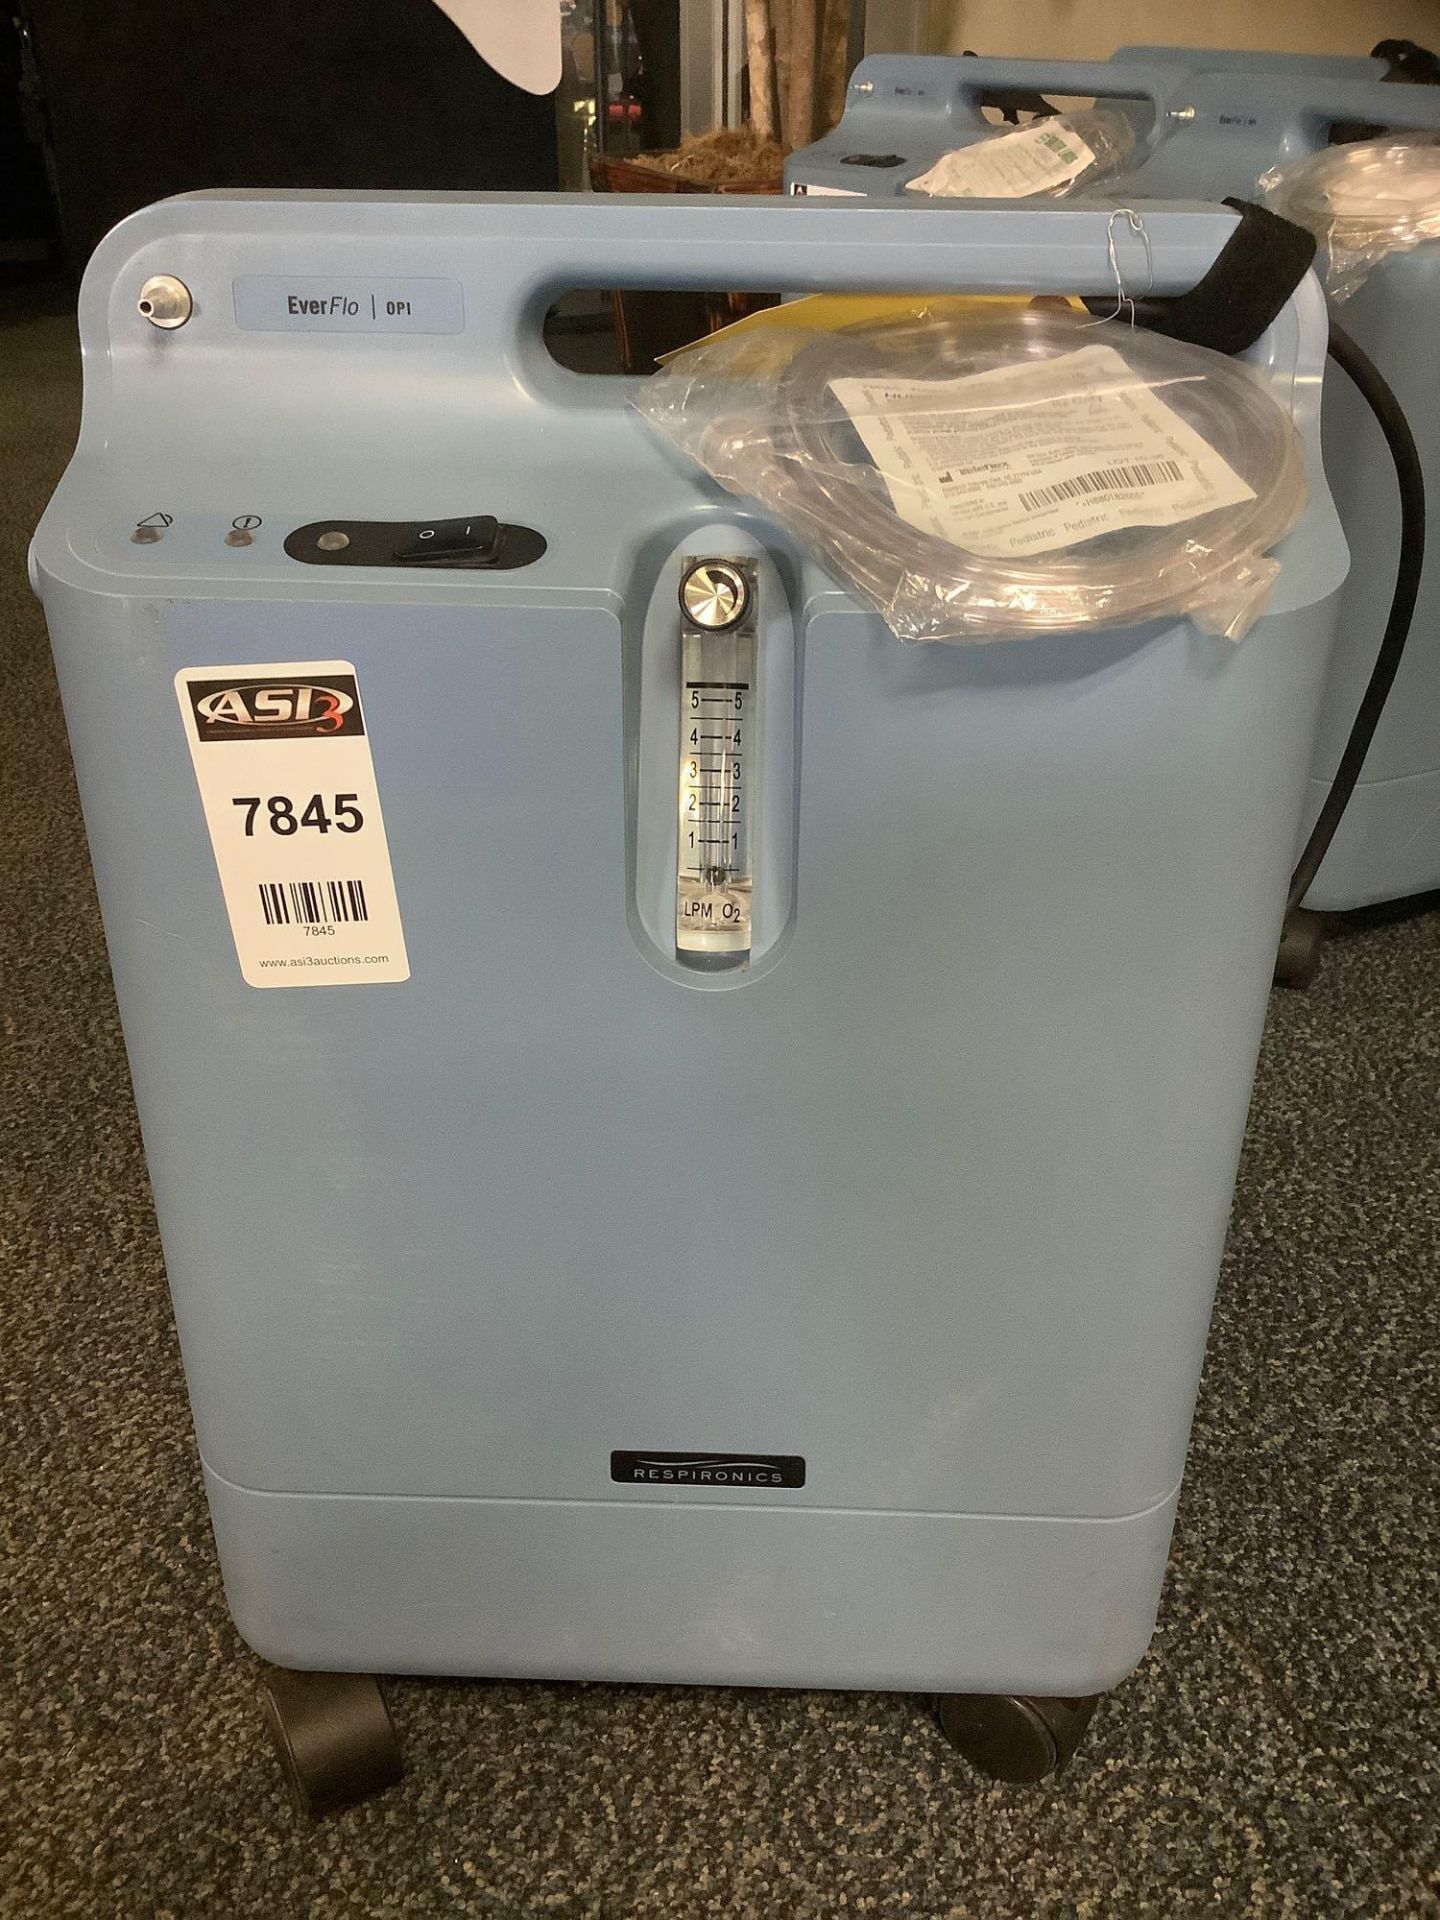 RESPIRONICS EVERFLO I OPI OXYGEN CONCENTRATOR, APPROX 120VOLTS, APPROX MAX O2 96%, NEW HOSE INCLUDED